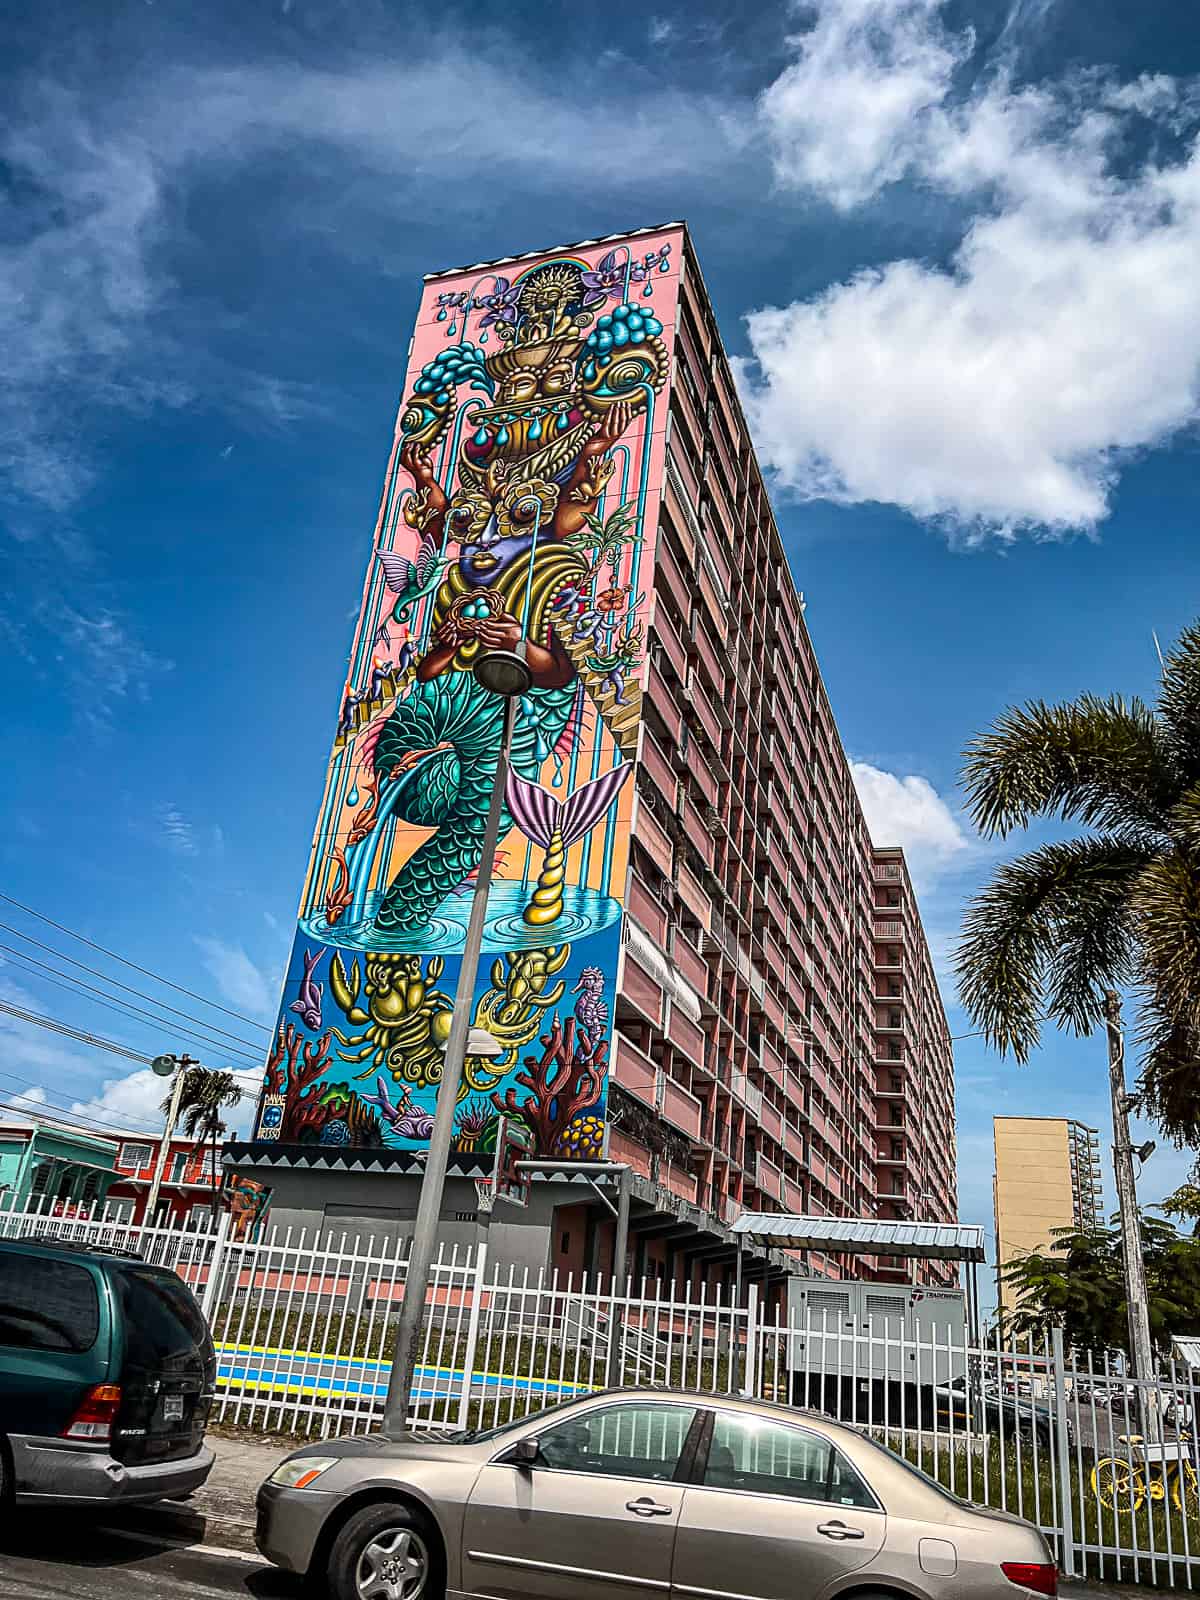 Outdoor Activity for Families in Puerto Rico with view of Santurce Murals